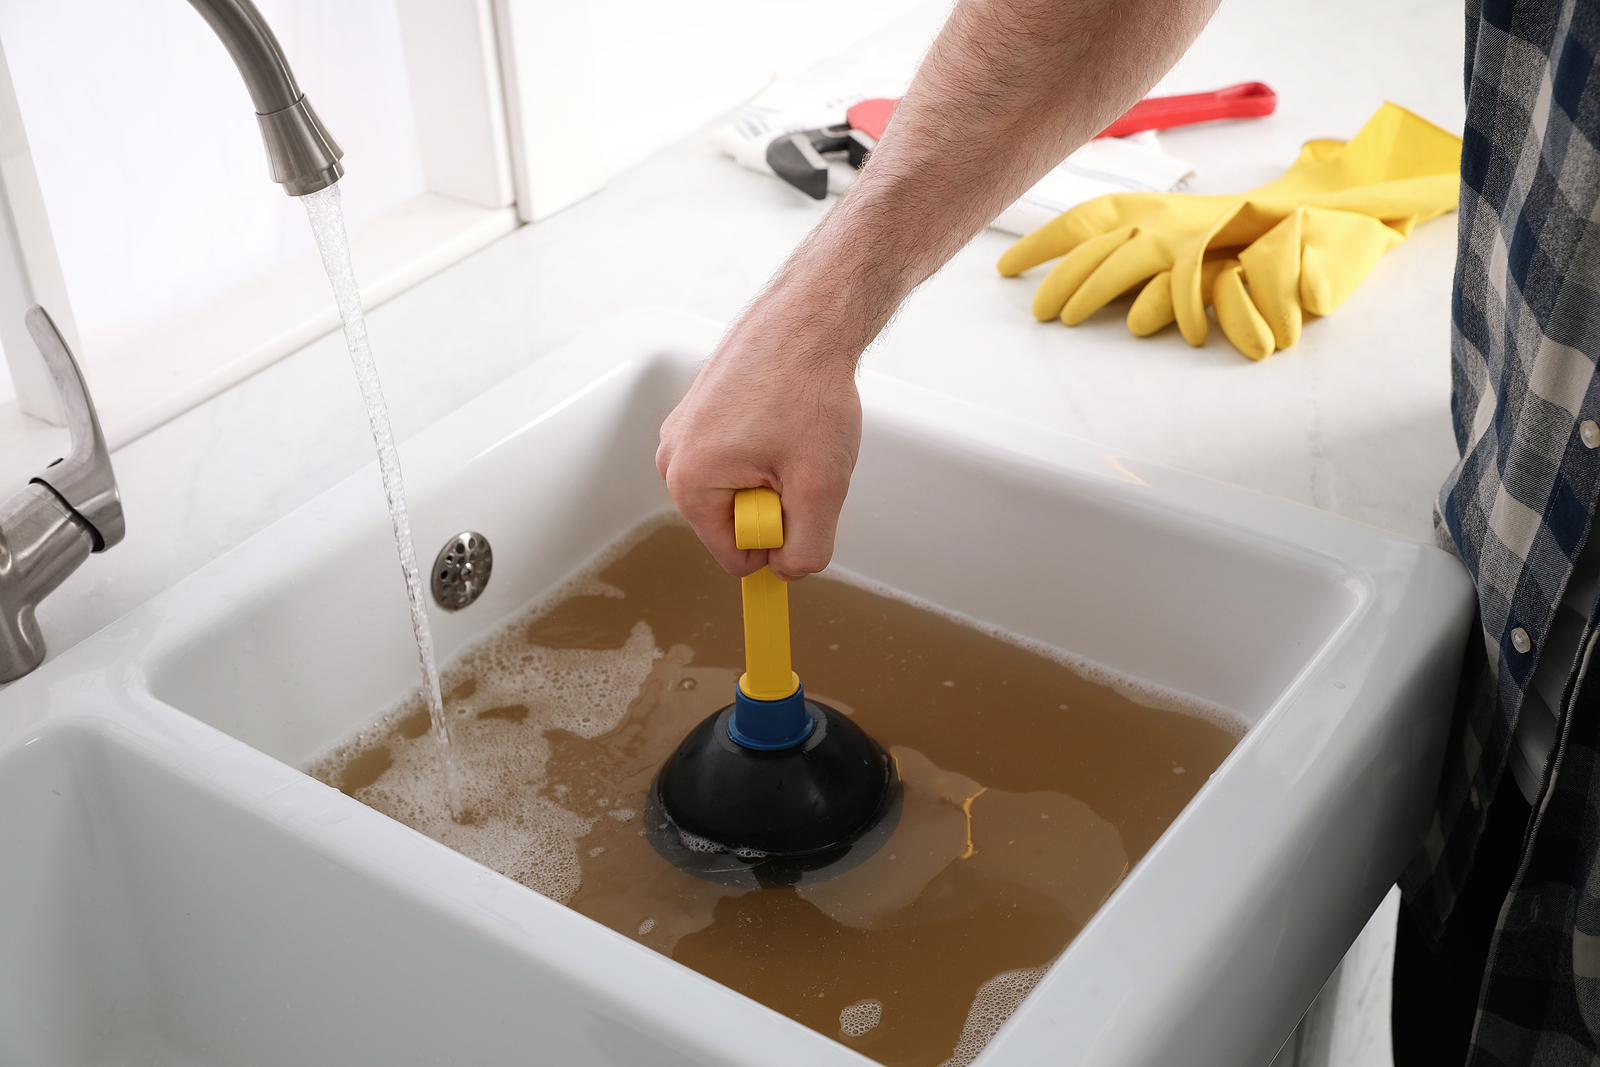 How to Unclog a Sink Drain with a Plumber’s Snake